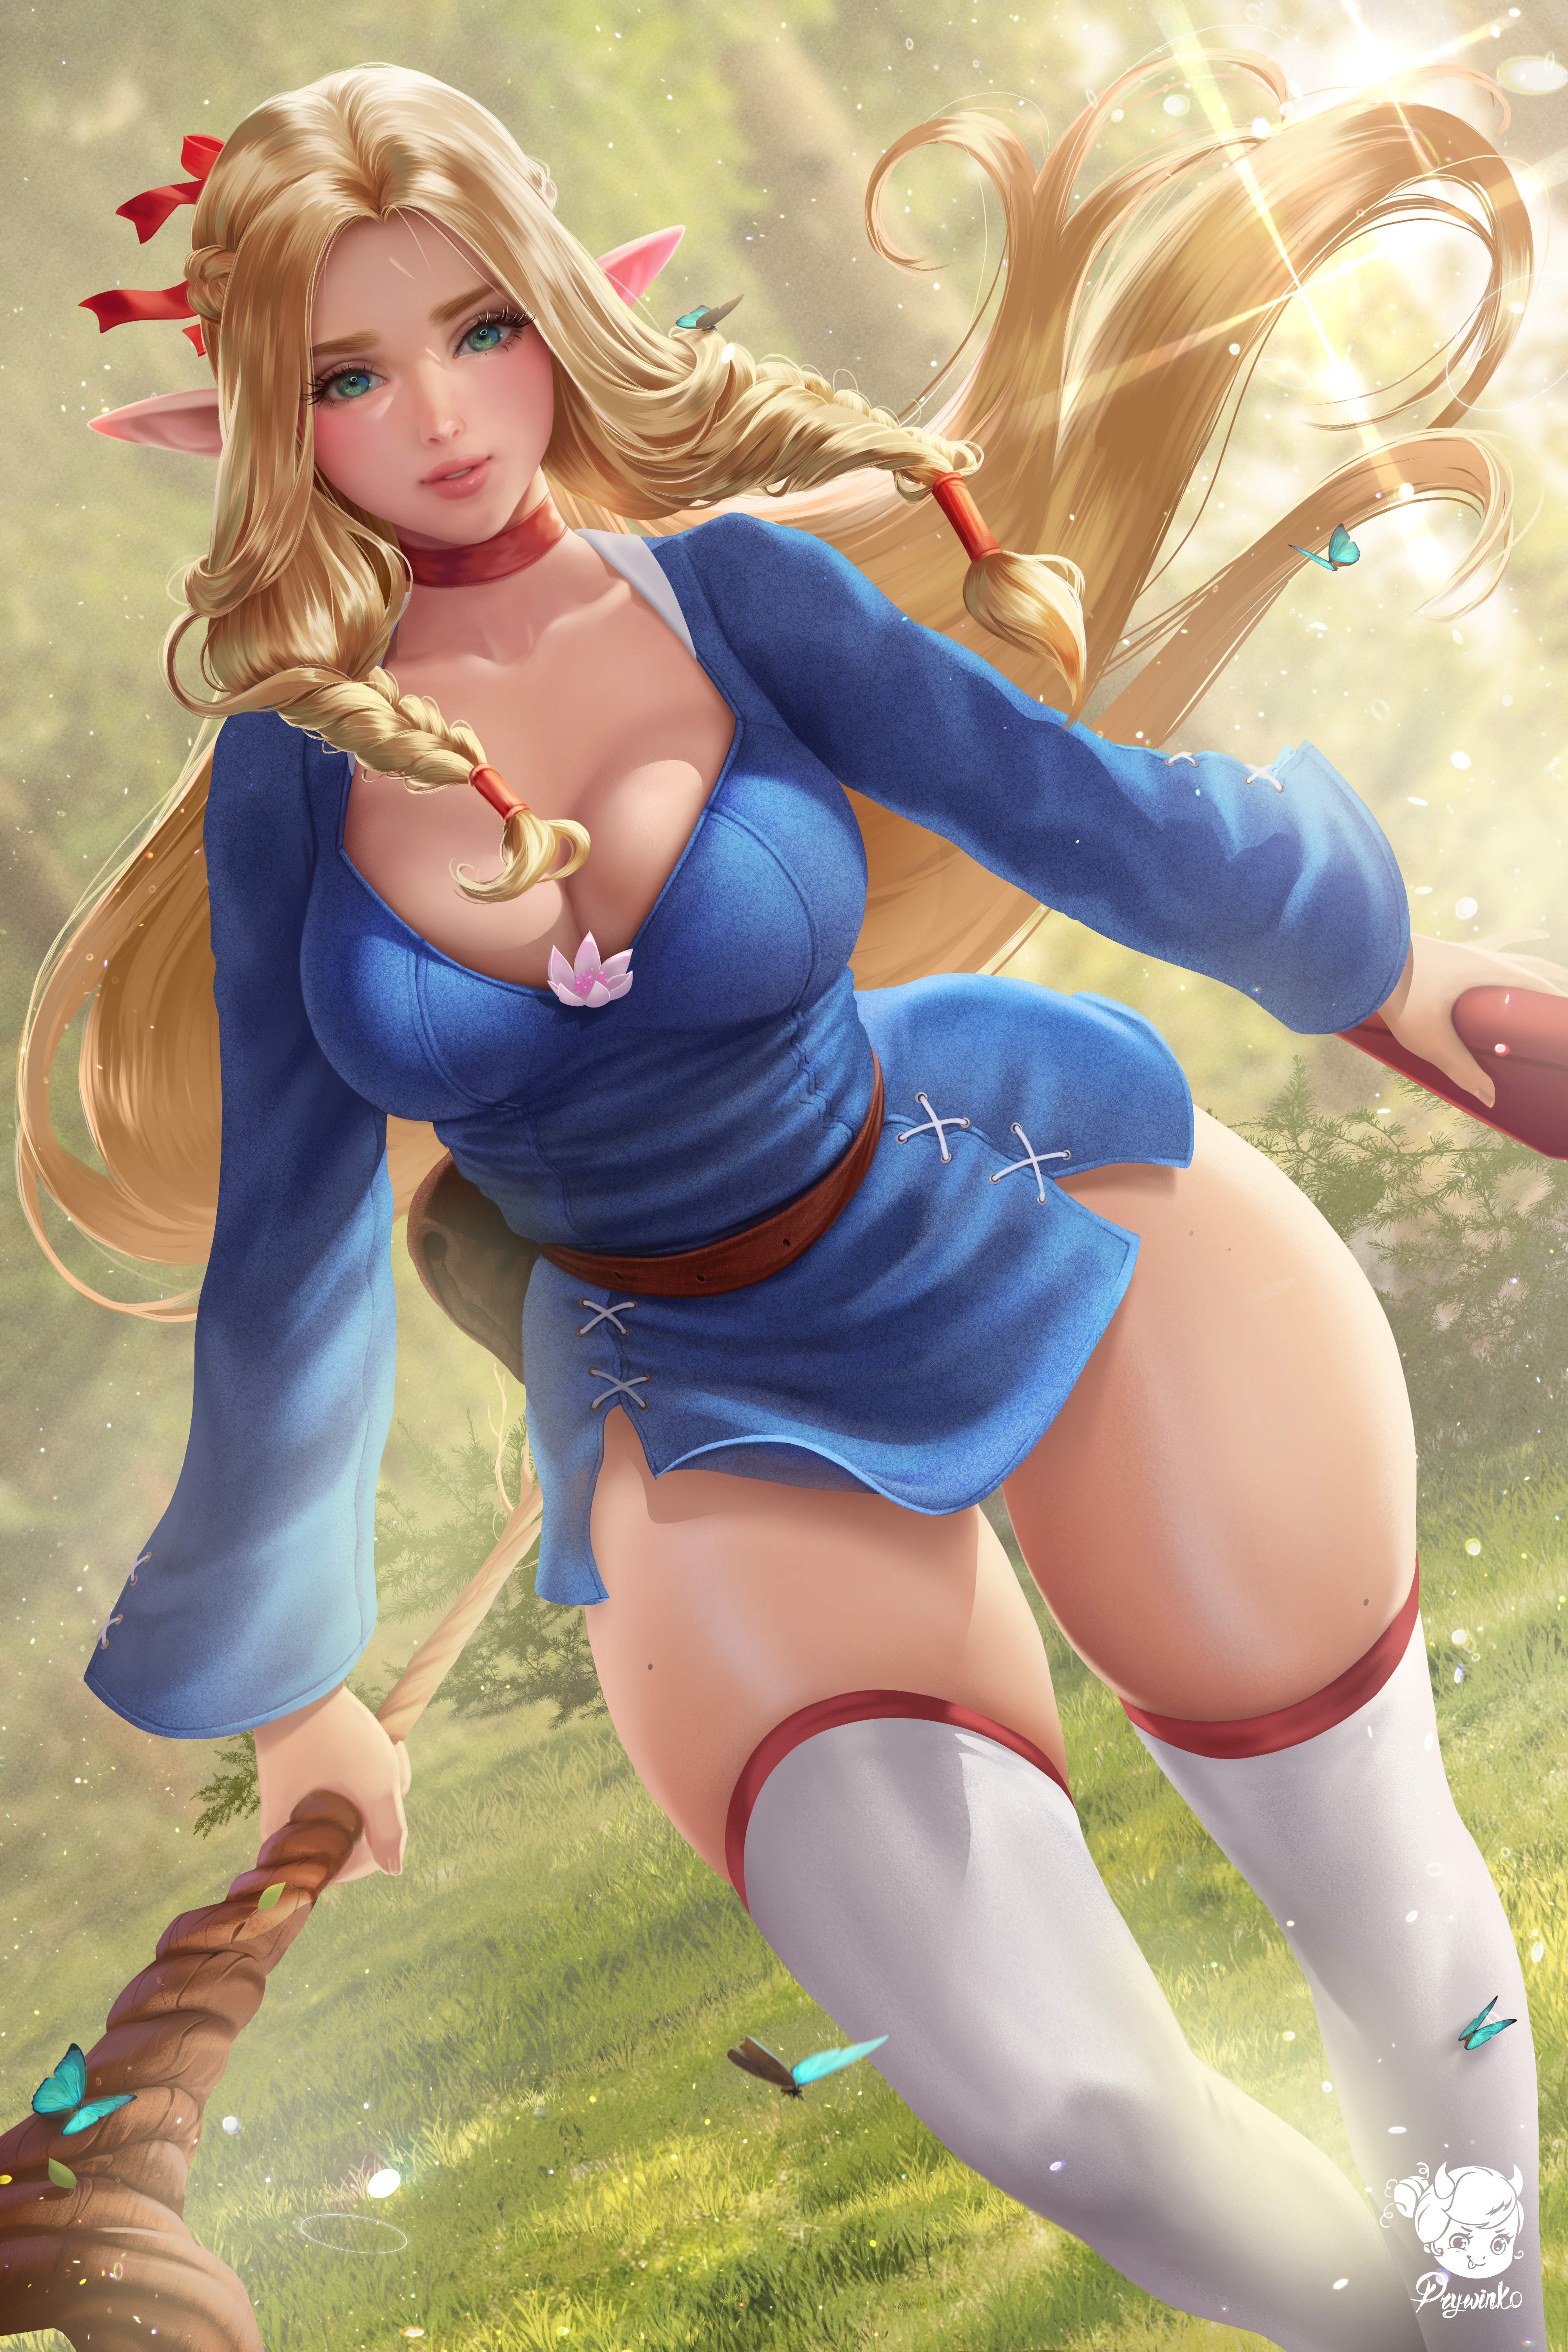 Anime 4000x6000 Delicious in Dungeon anime anime girls elves dress cleavage wide hips curvy thick thigh stockings 2D artwork drawing fan art Prywinko Marcille Donato